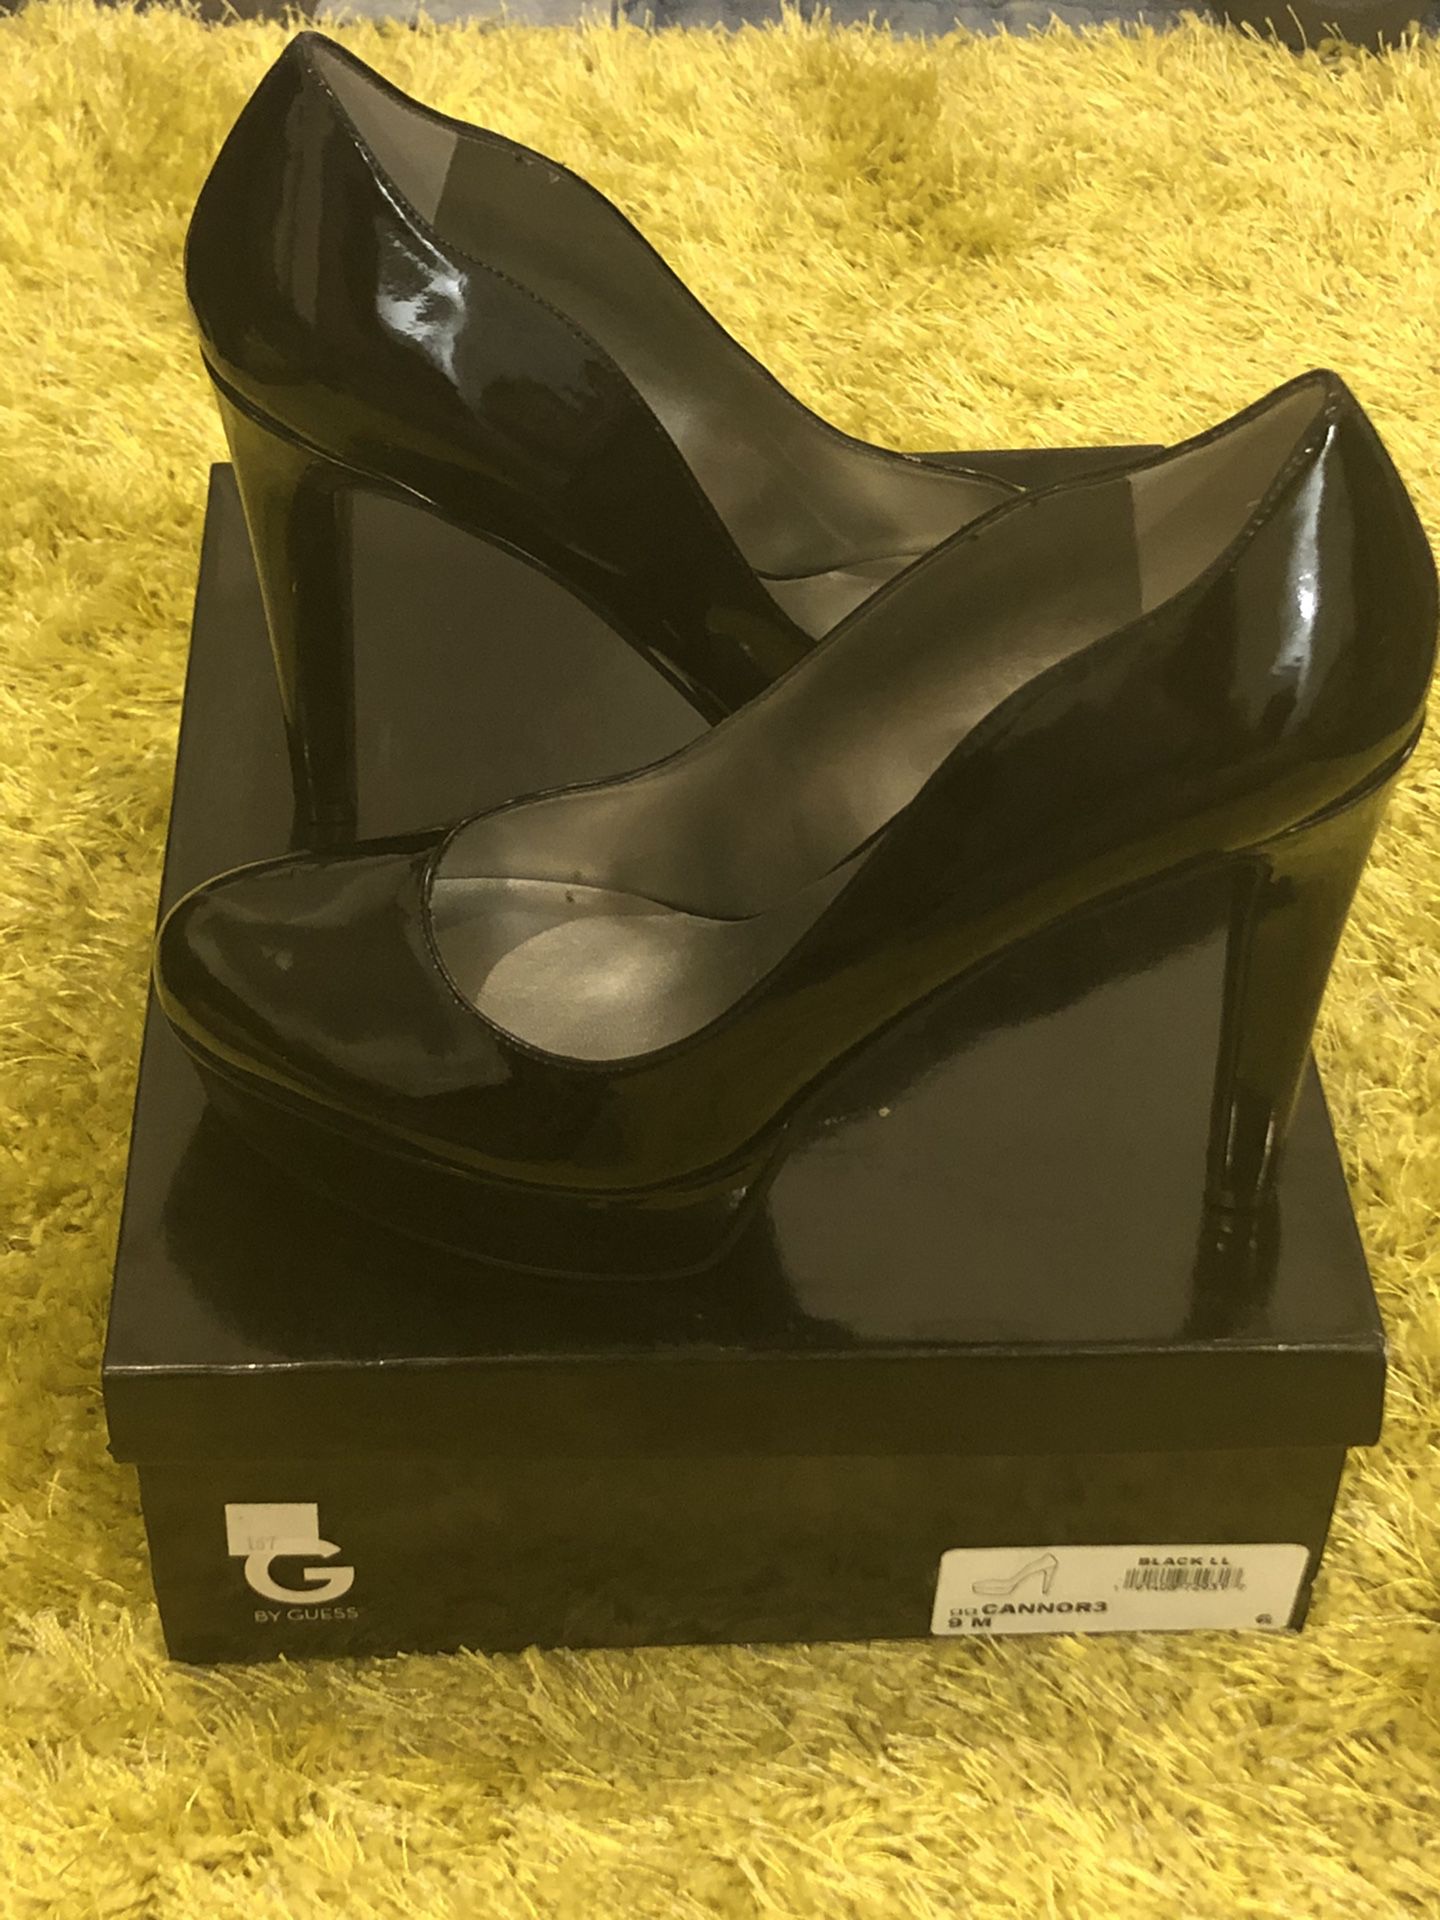 G by Guess pumps